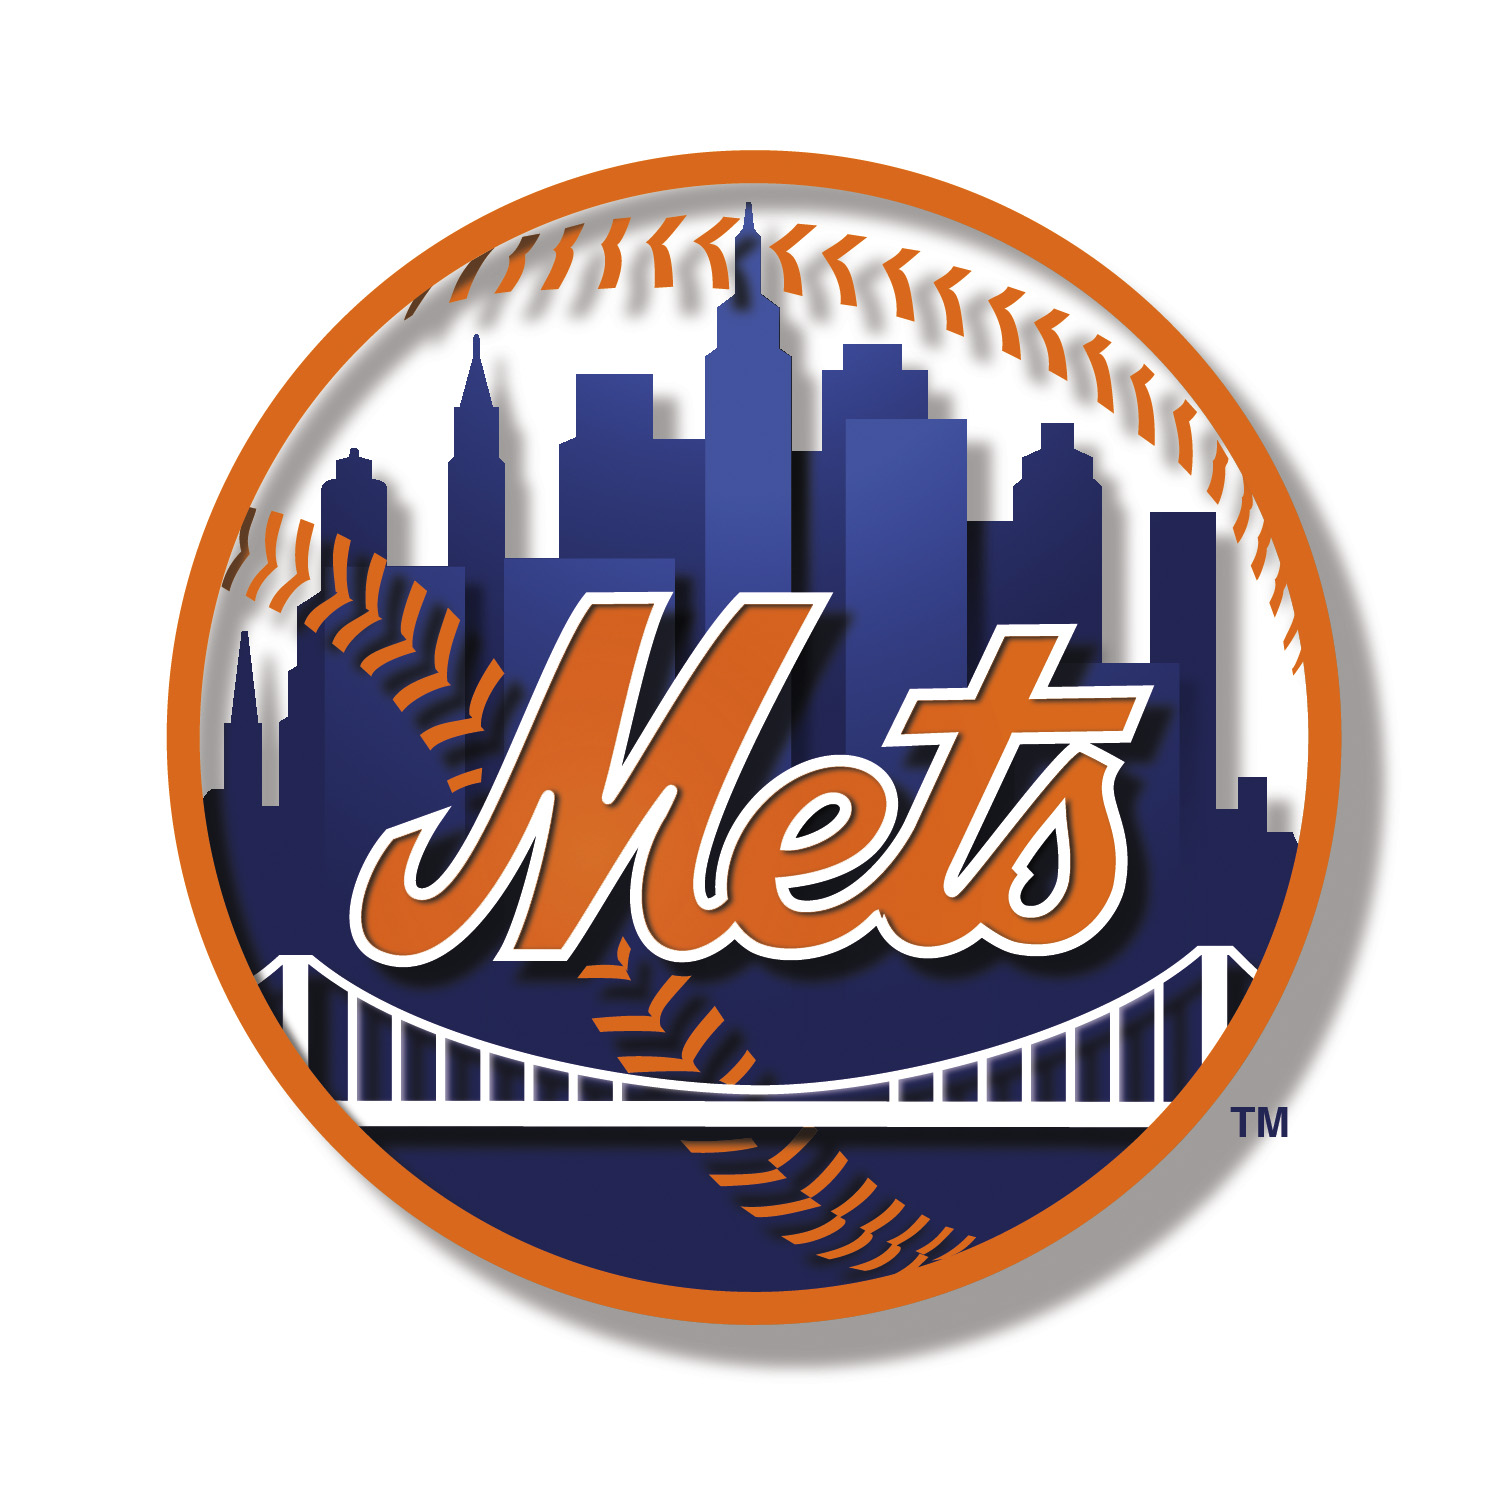  about New York Mets or even videos related to New York Mets